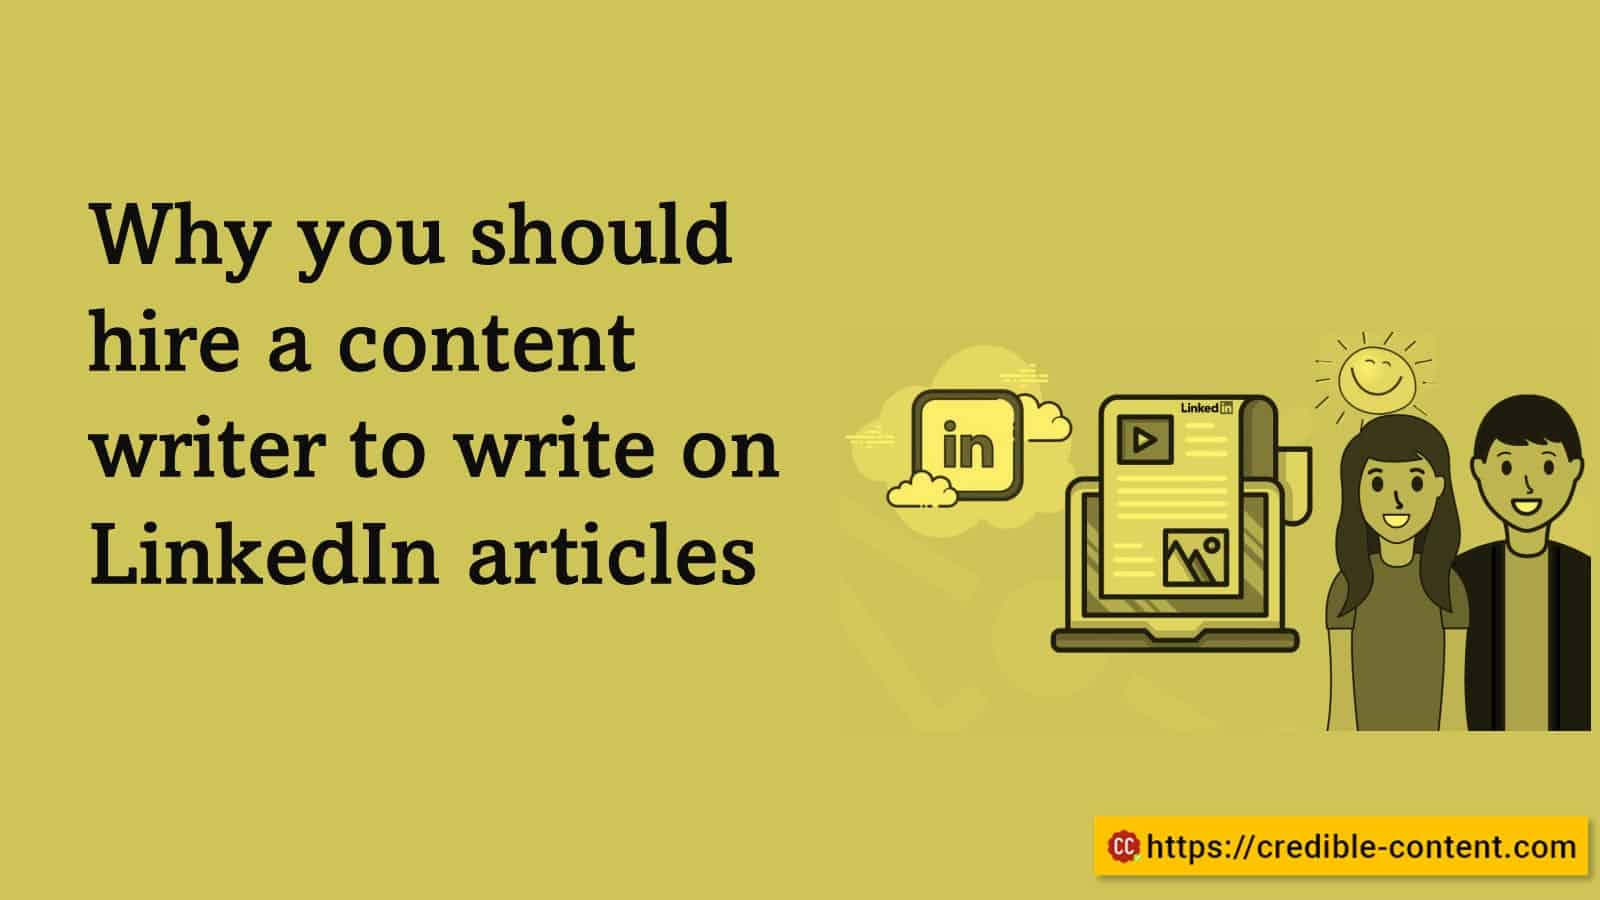 Why you should hire a content writer to write on LinkedIn articles